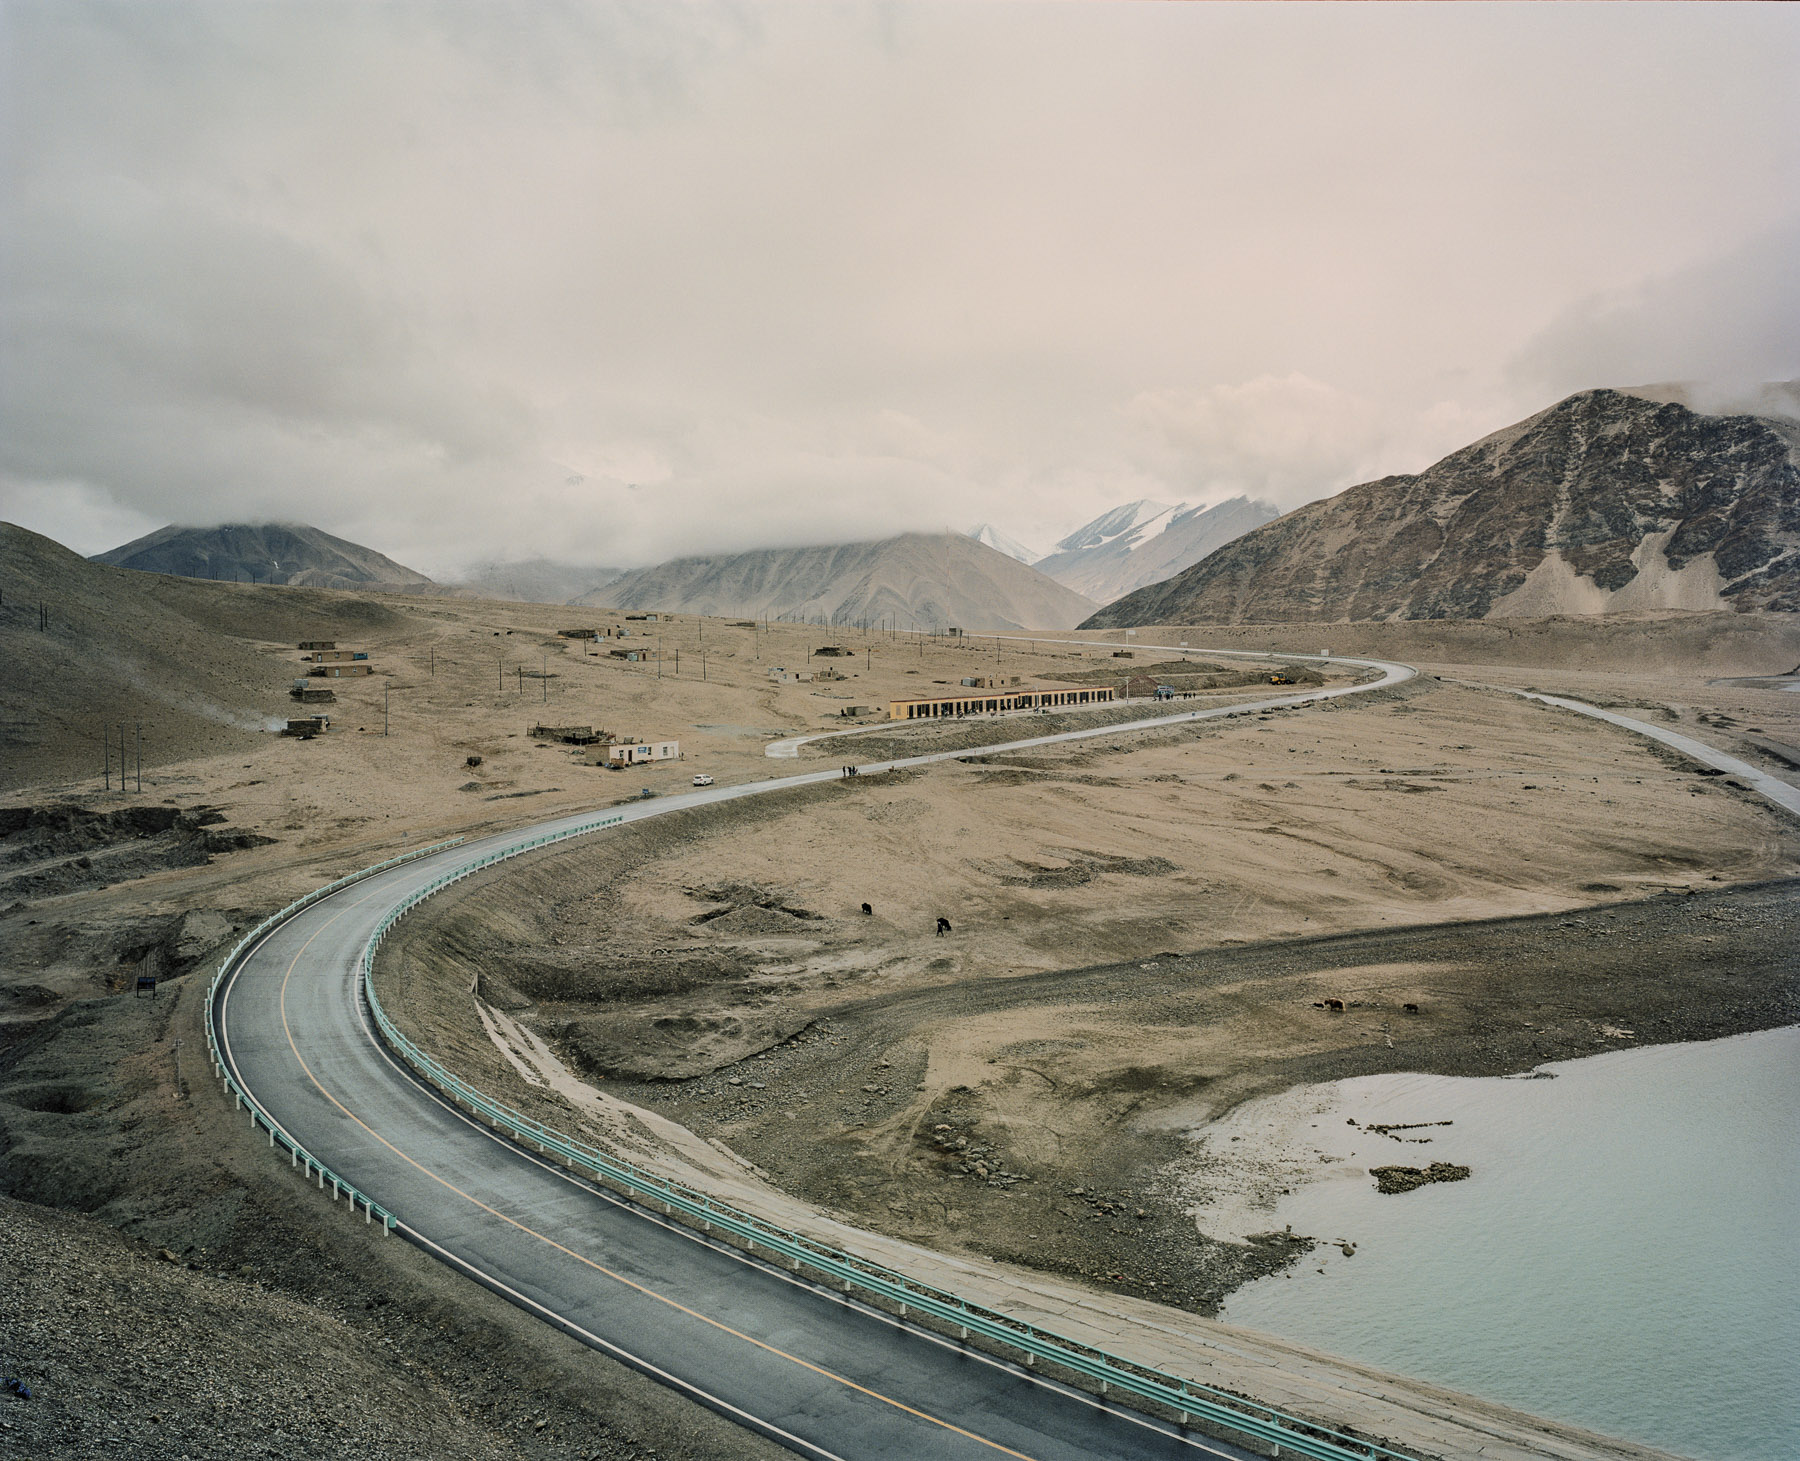  May 2016. Xinjiang province, China. View of road G314 in China, aka the Karakoram highway, the road linking the western Chinese province of Xinjiang with Pakistan through the Pamir mountains. On the right is the Baishahu lake.  